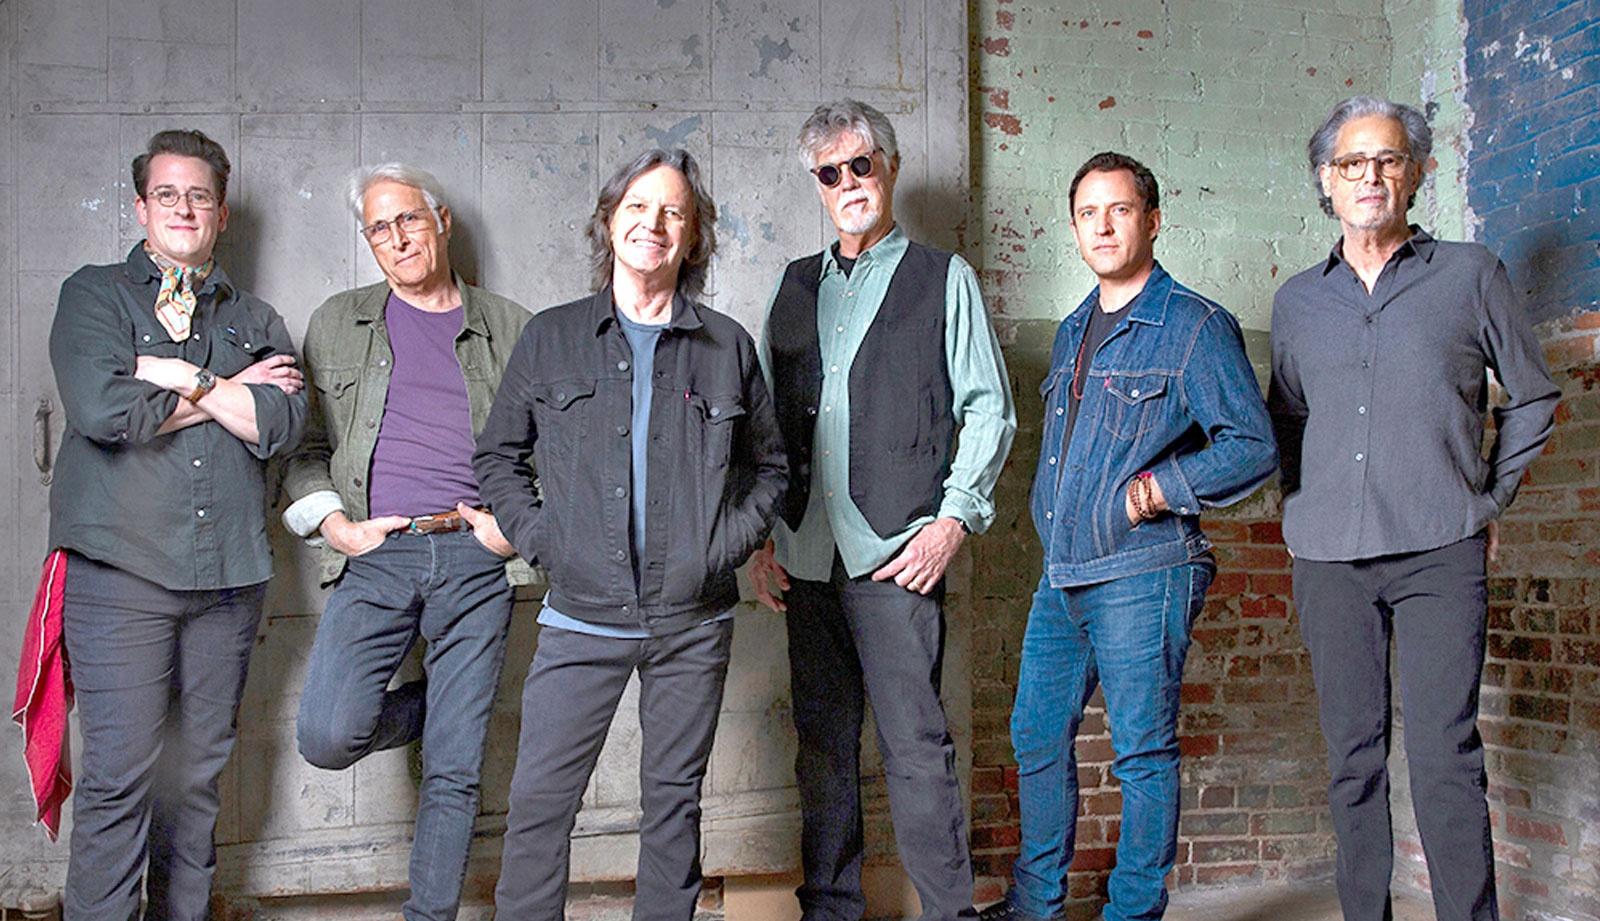 Nitty Gritty Dirt Band: 50 Years and Circlin’ Back